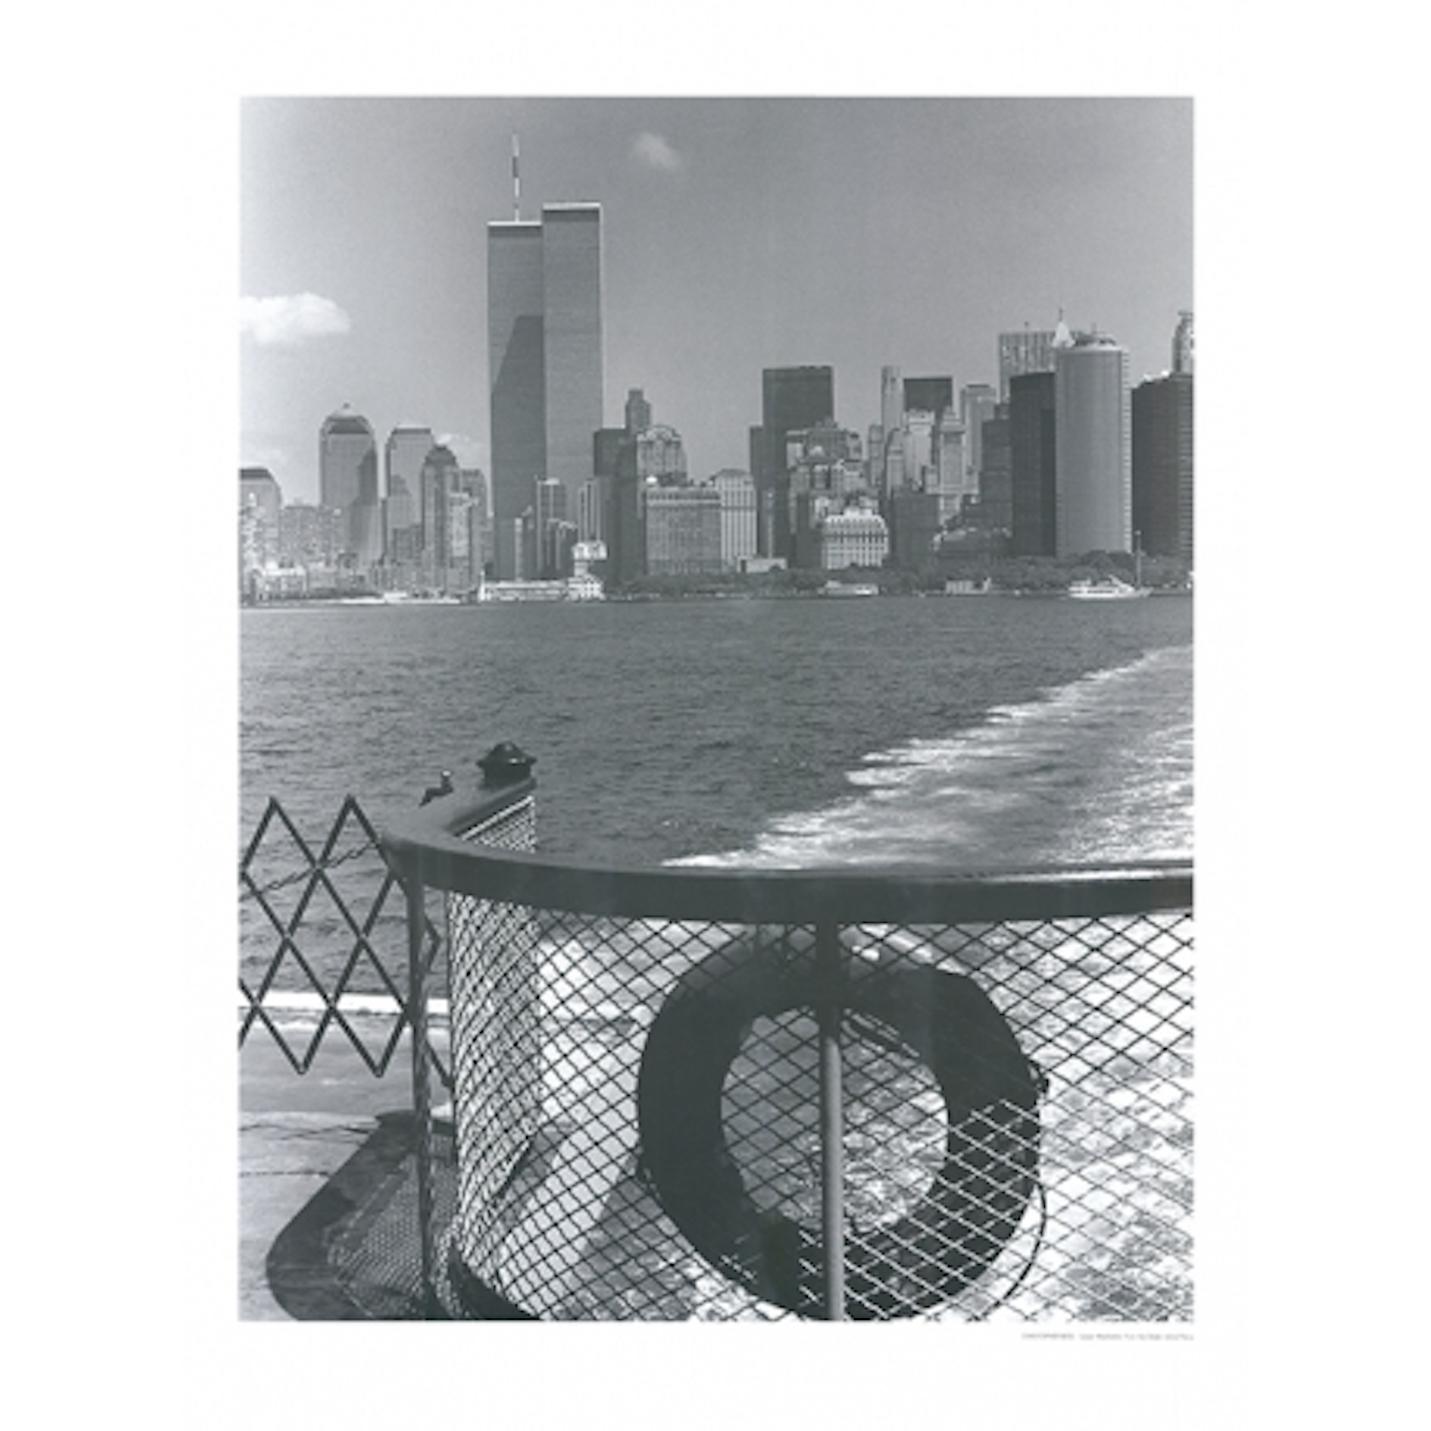 Monochrome photo with a view of the Manhattan skyline from the Staten Island Ferry board, a delightful combination of a row of skyscrapers and a water component of New York Harbor. 
Christopher Bliss is a New York based photographer who has always